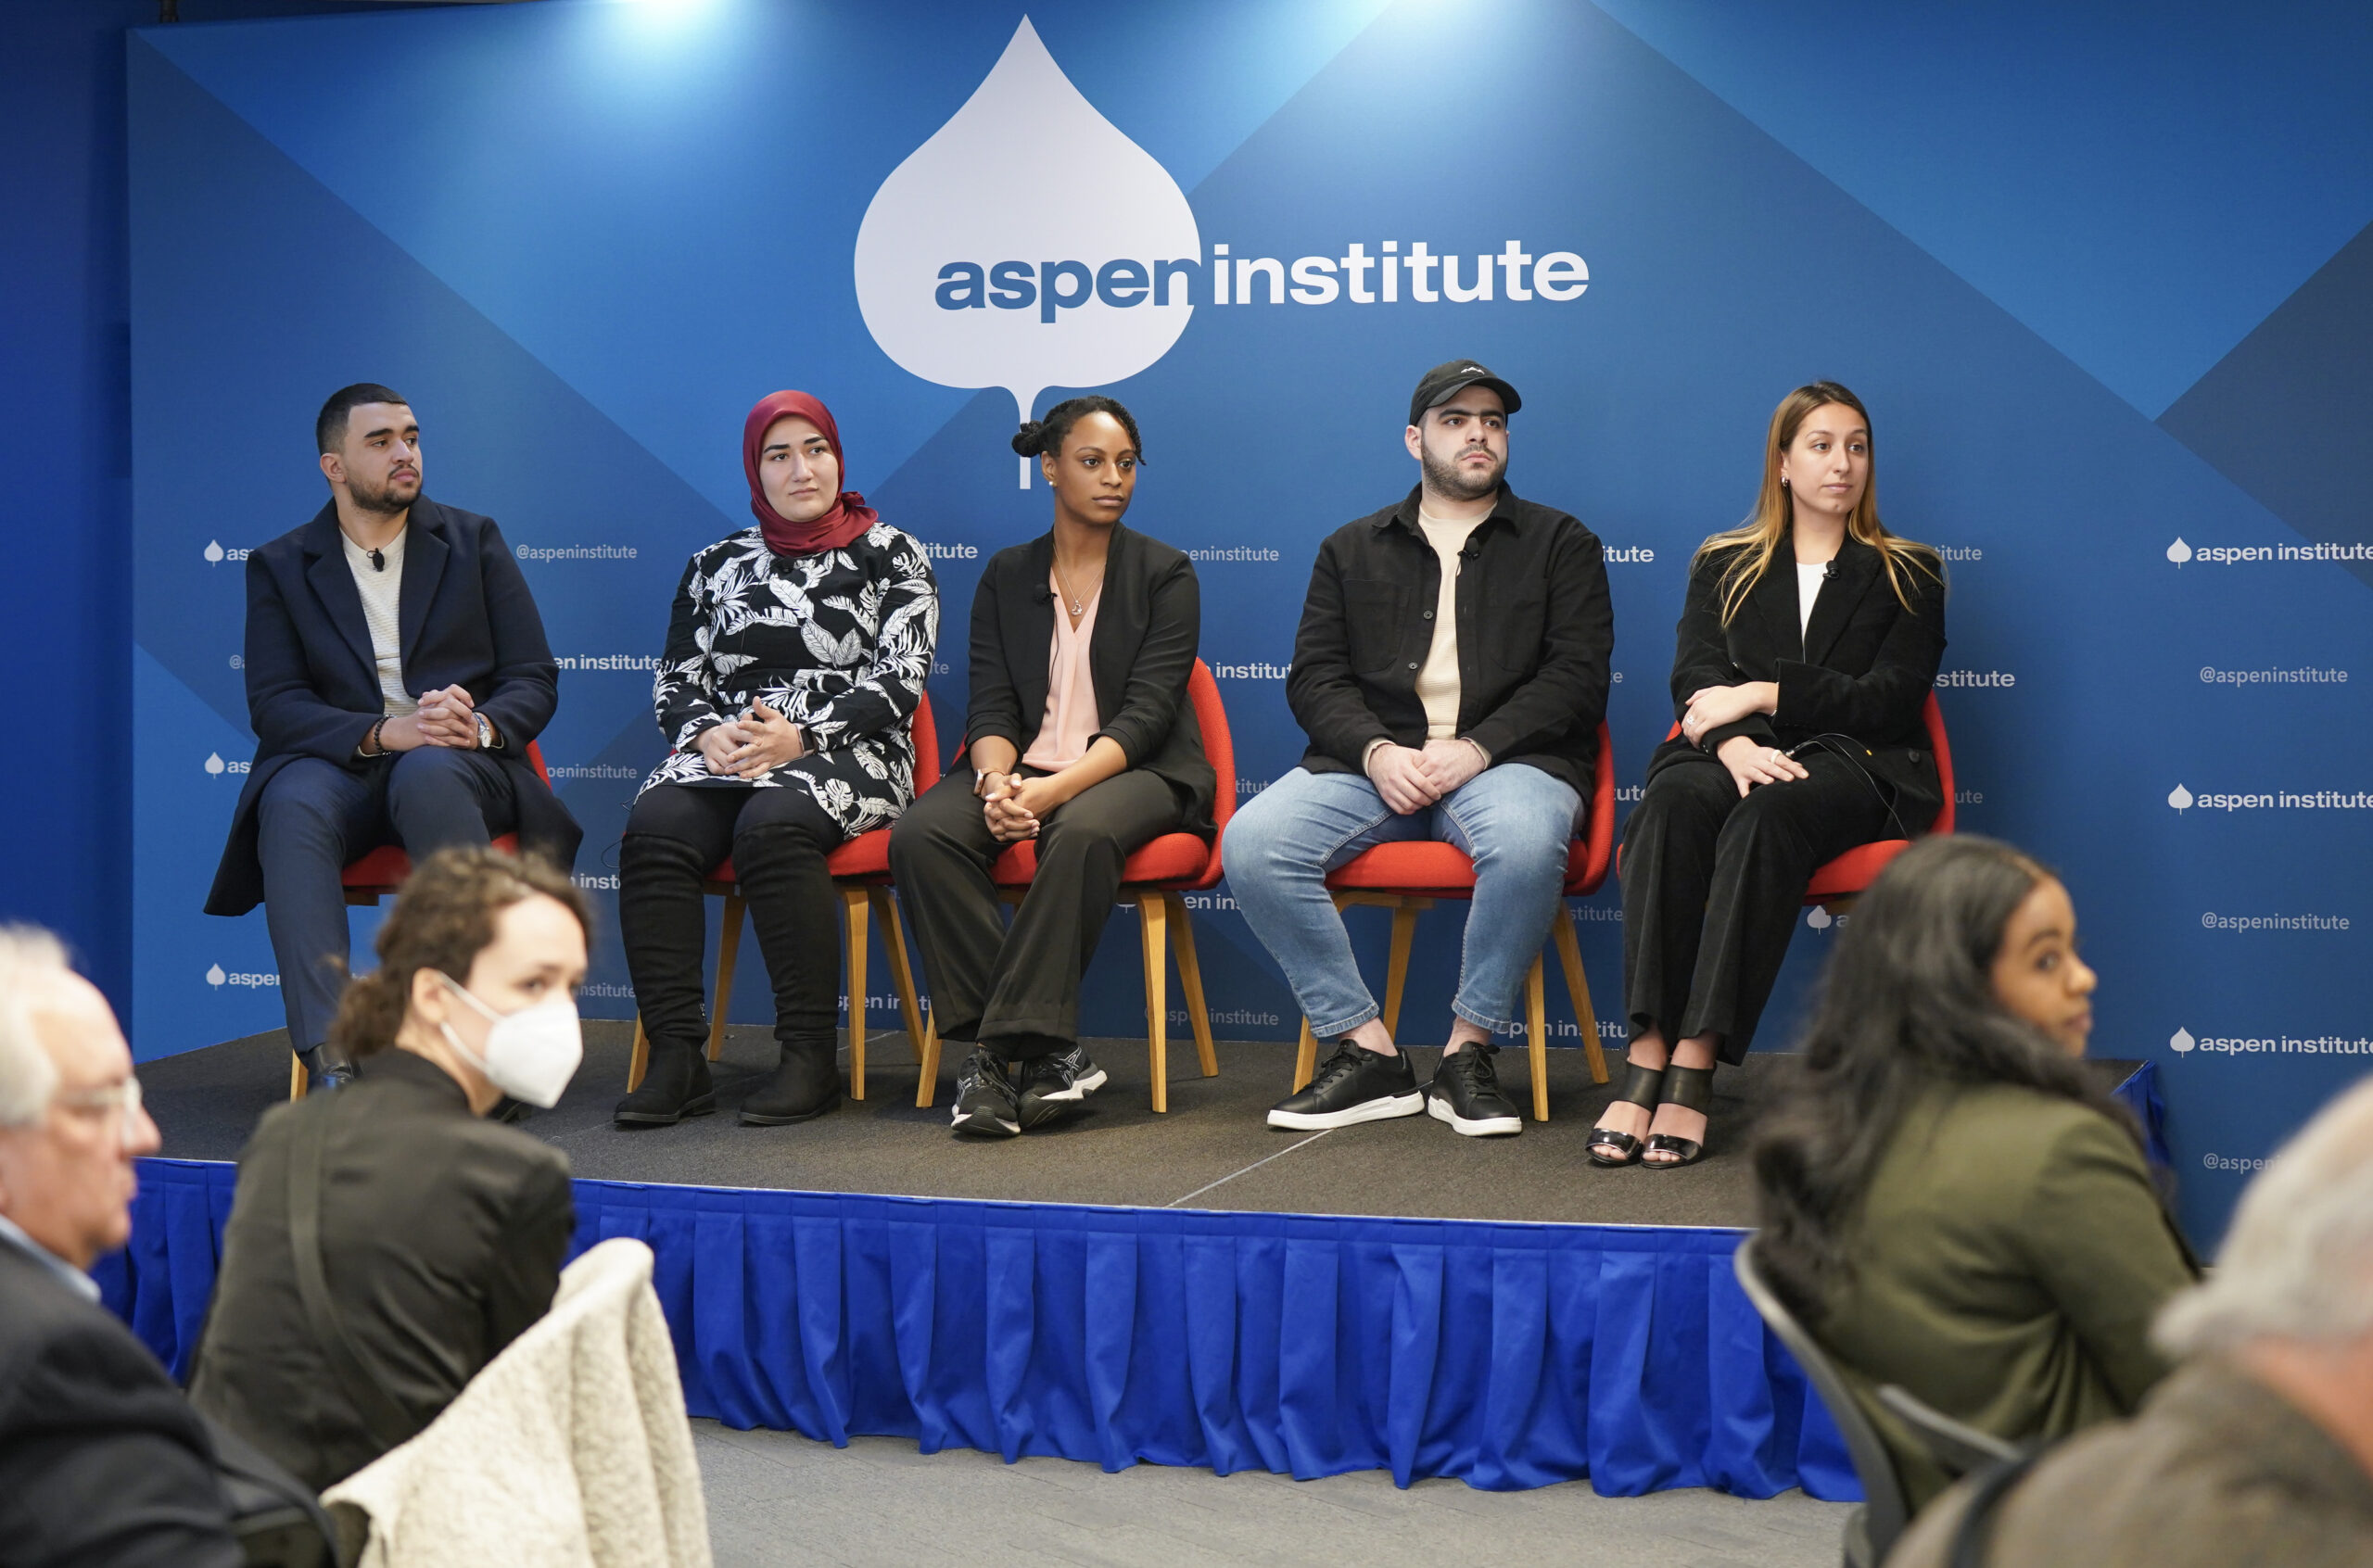 Five people sitting in chairs on a stage in the Aspen Institute